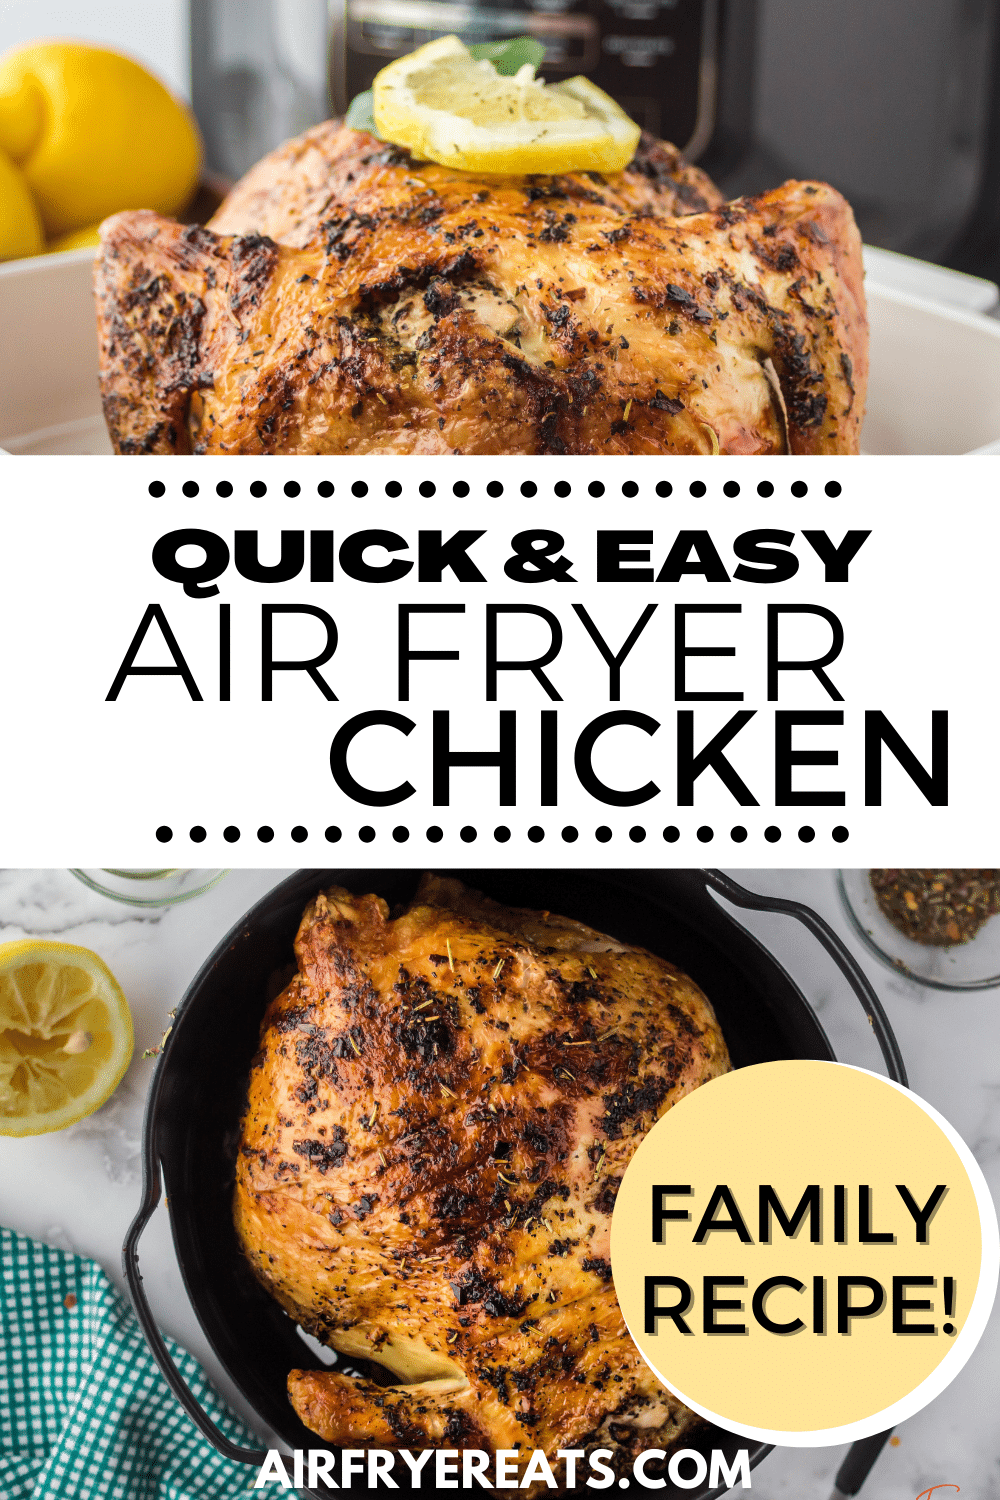 two photos of air fryer whole chickens with a text box in the center that says "quick and easy air fryer chicken"